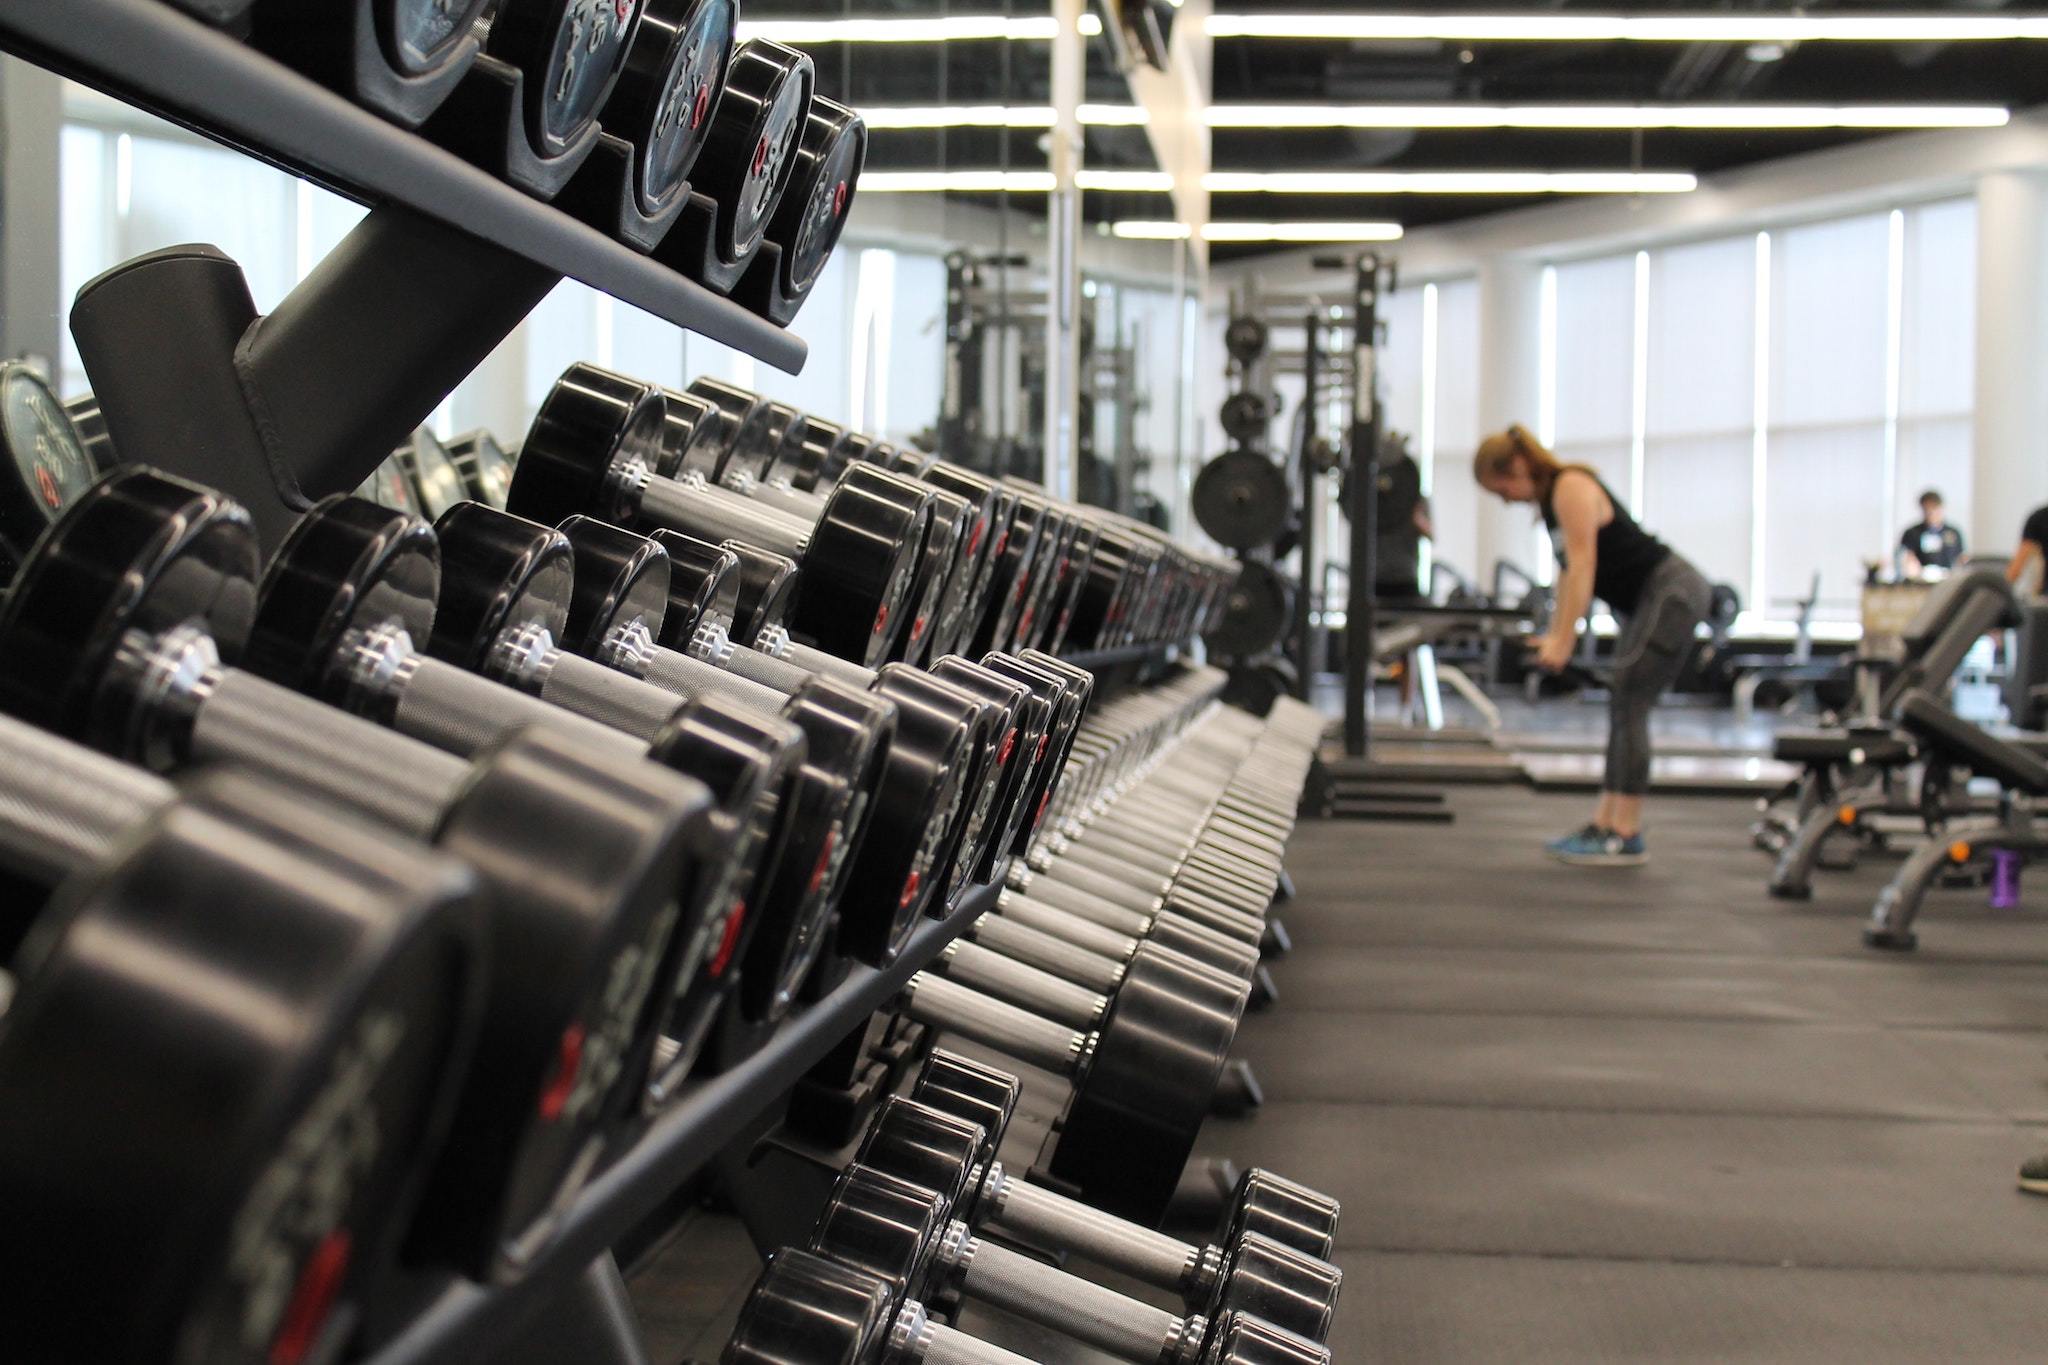 A Gym In Casula Has Become The Second Confirmed Virus Hotspot In